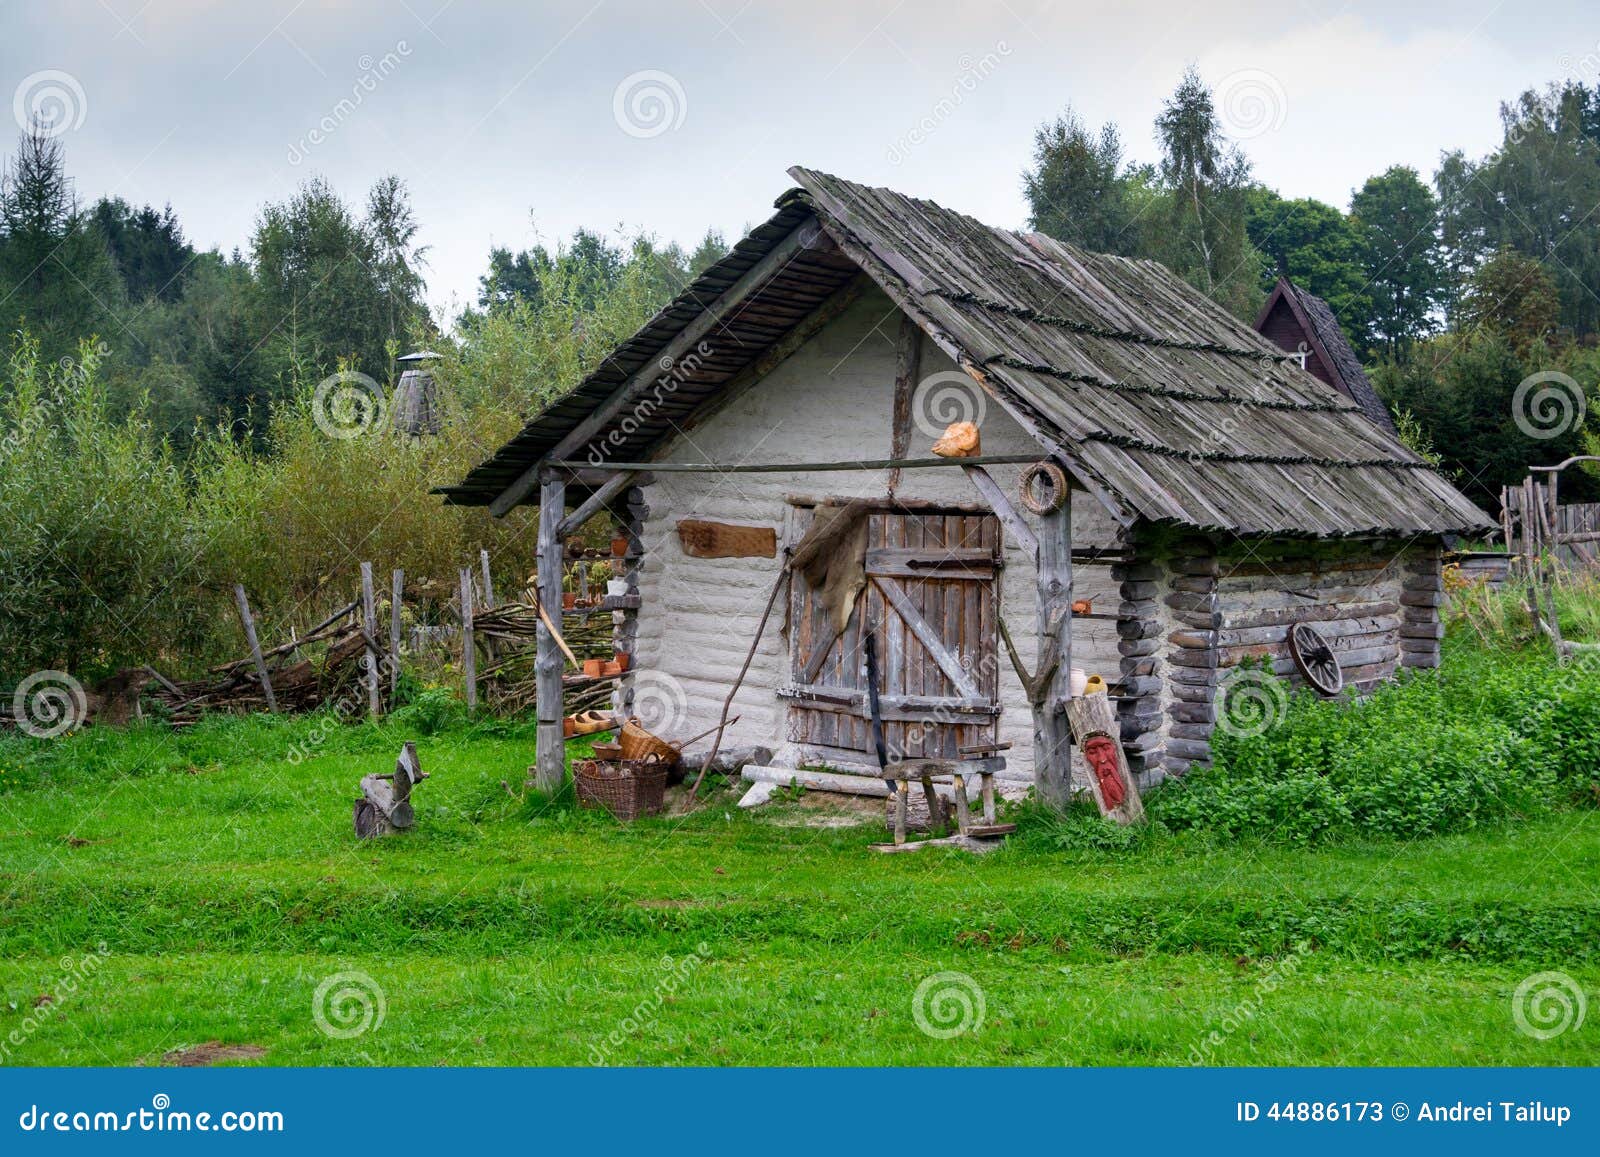 real old medieval house